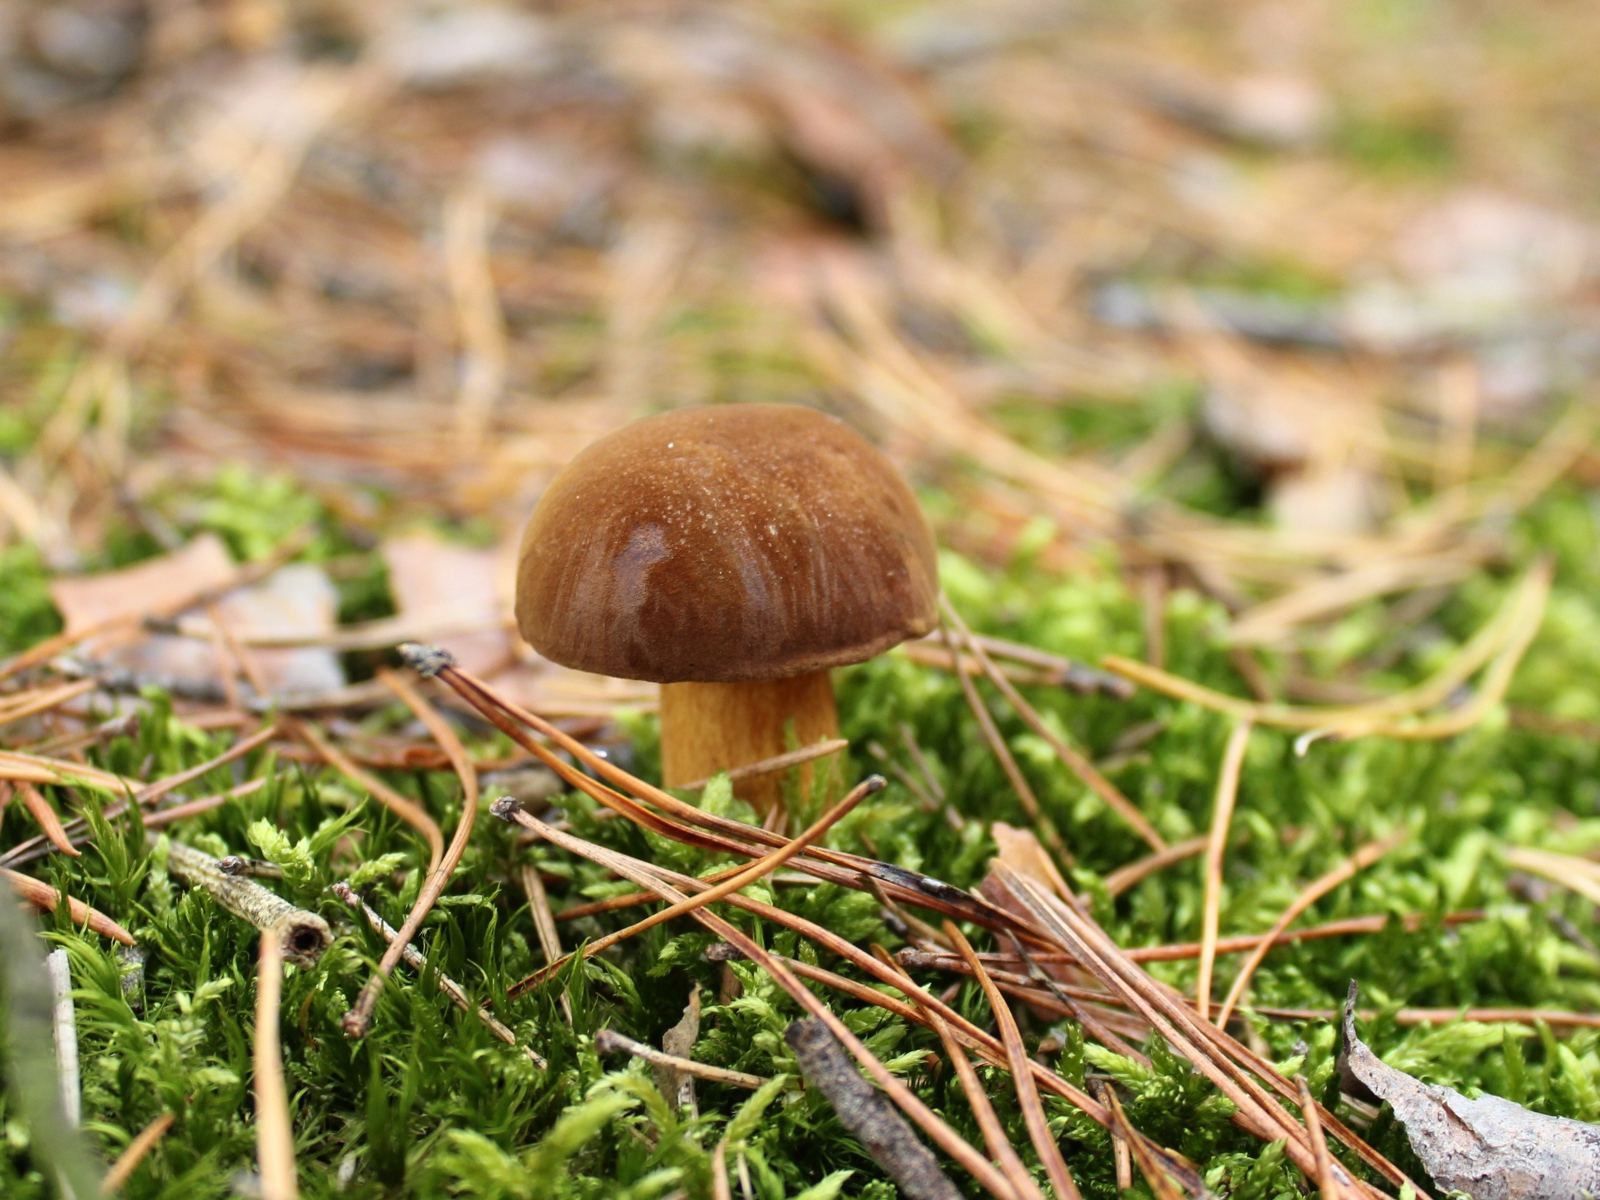 Mushroom grows on grass covered with green moss.